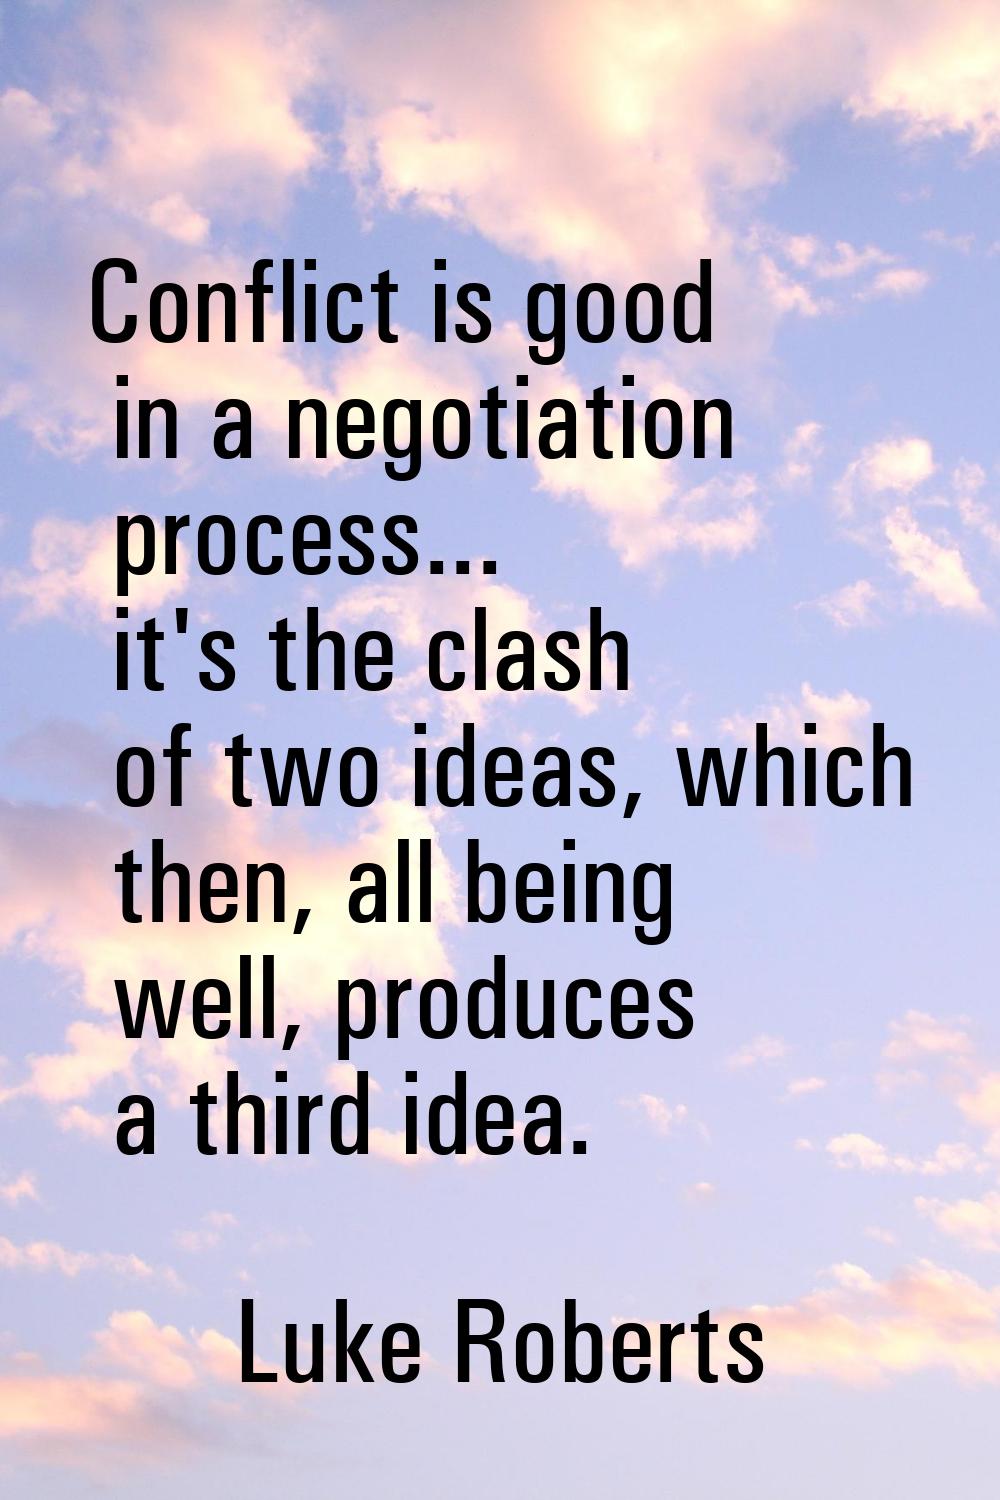 Conflict is good in a negotiation process... it's the clash of two ideas, which then, all being wel